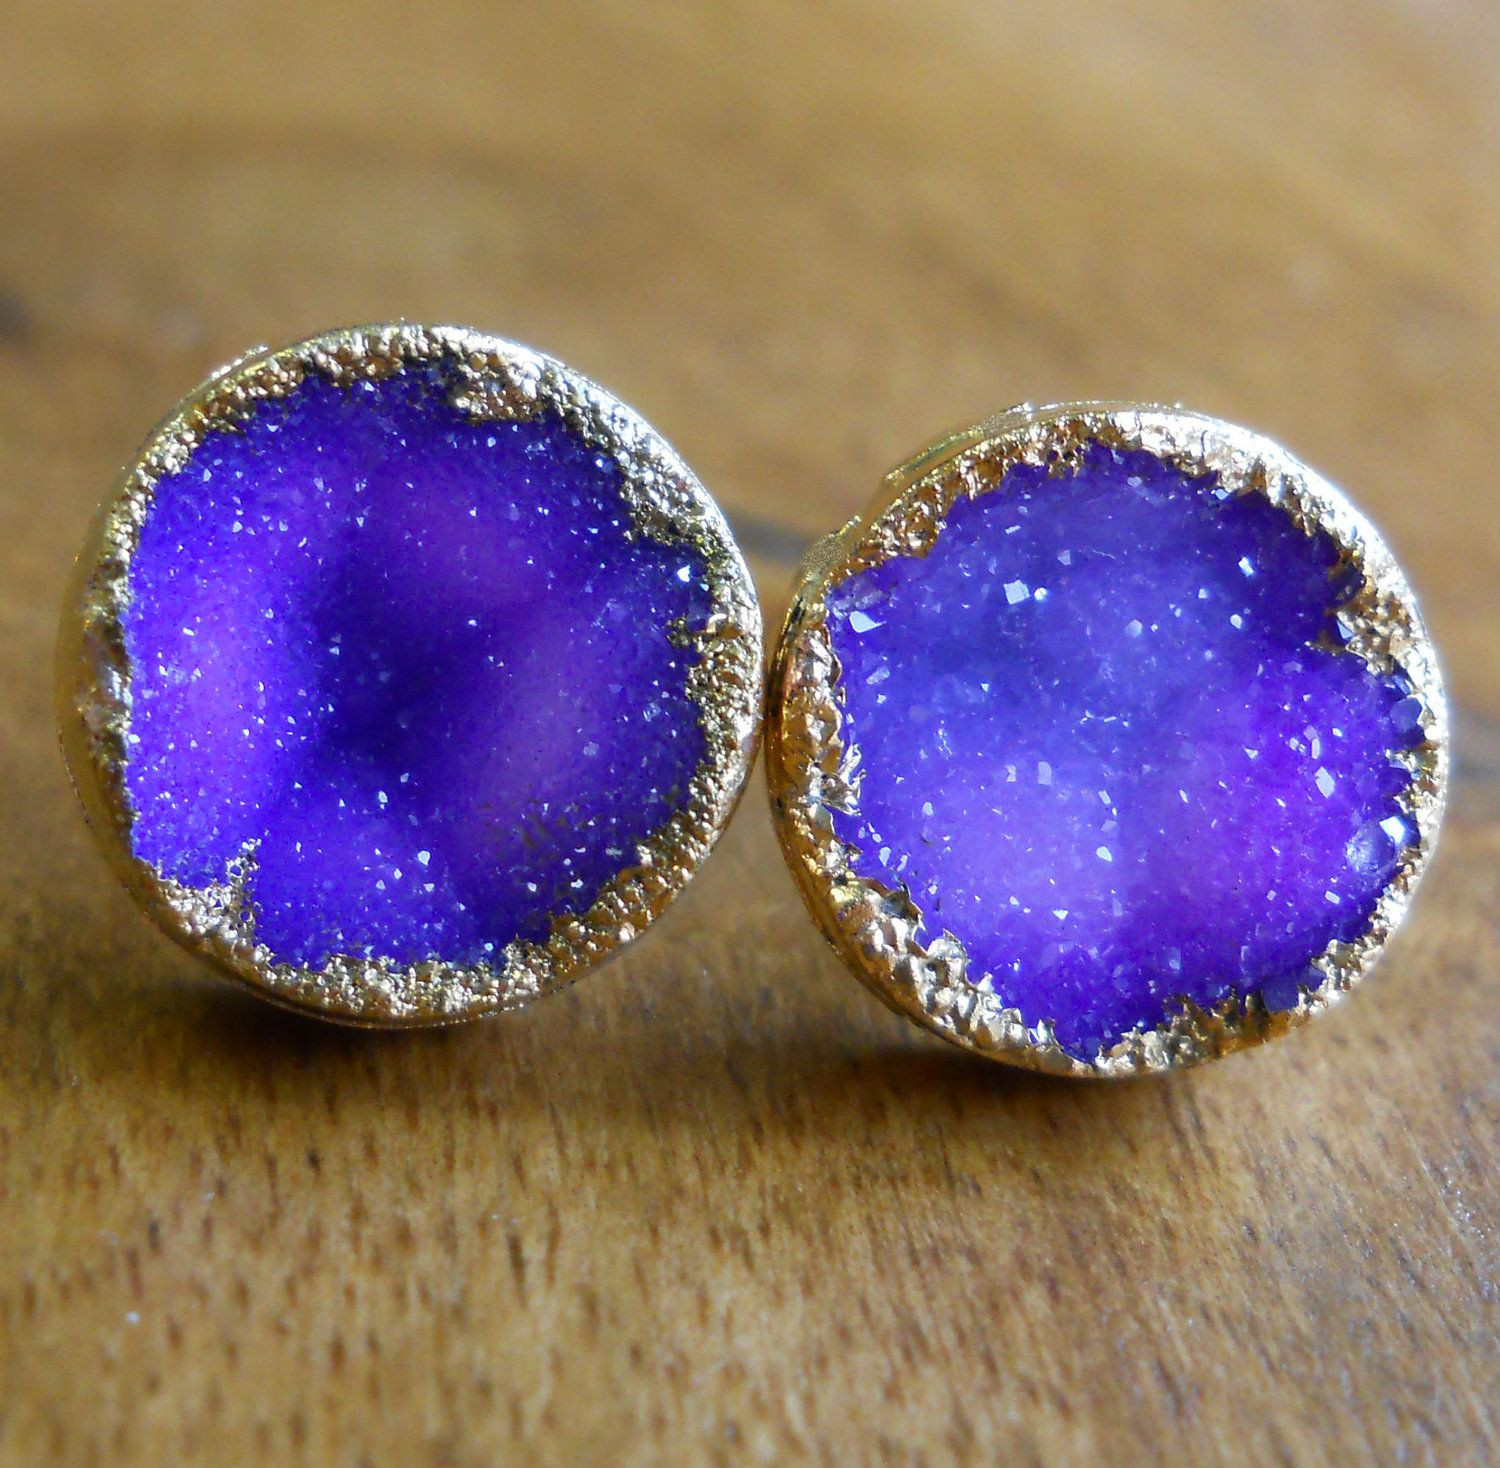 I Like The Way Your Sparkling Earrings Lay
 galaxy earrings think I may like this better as a